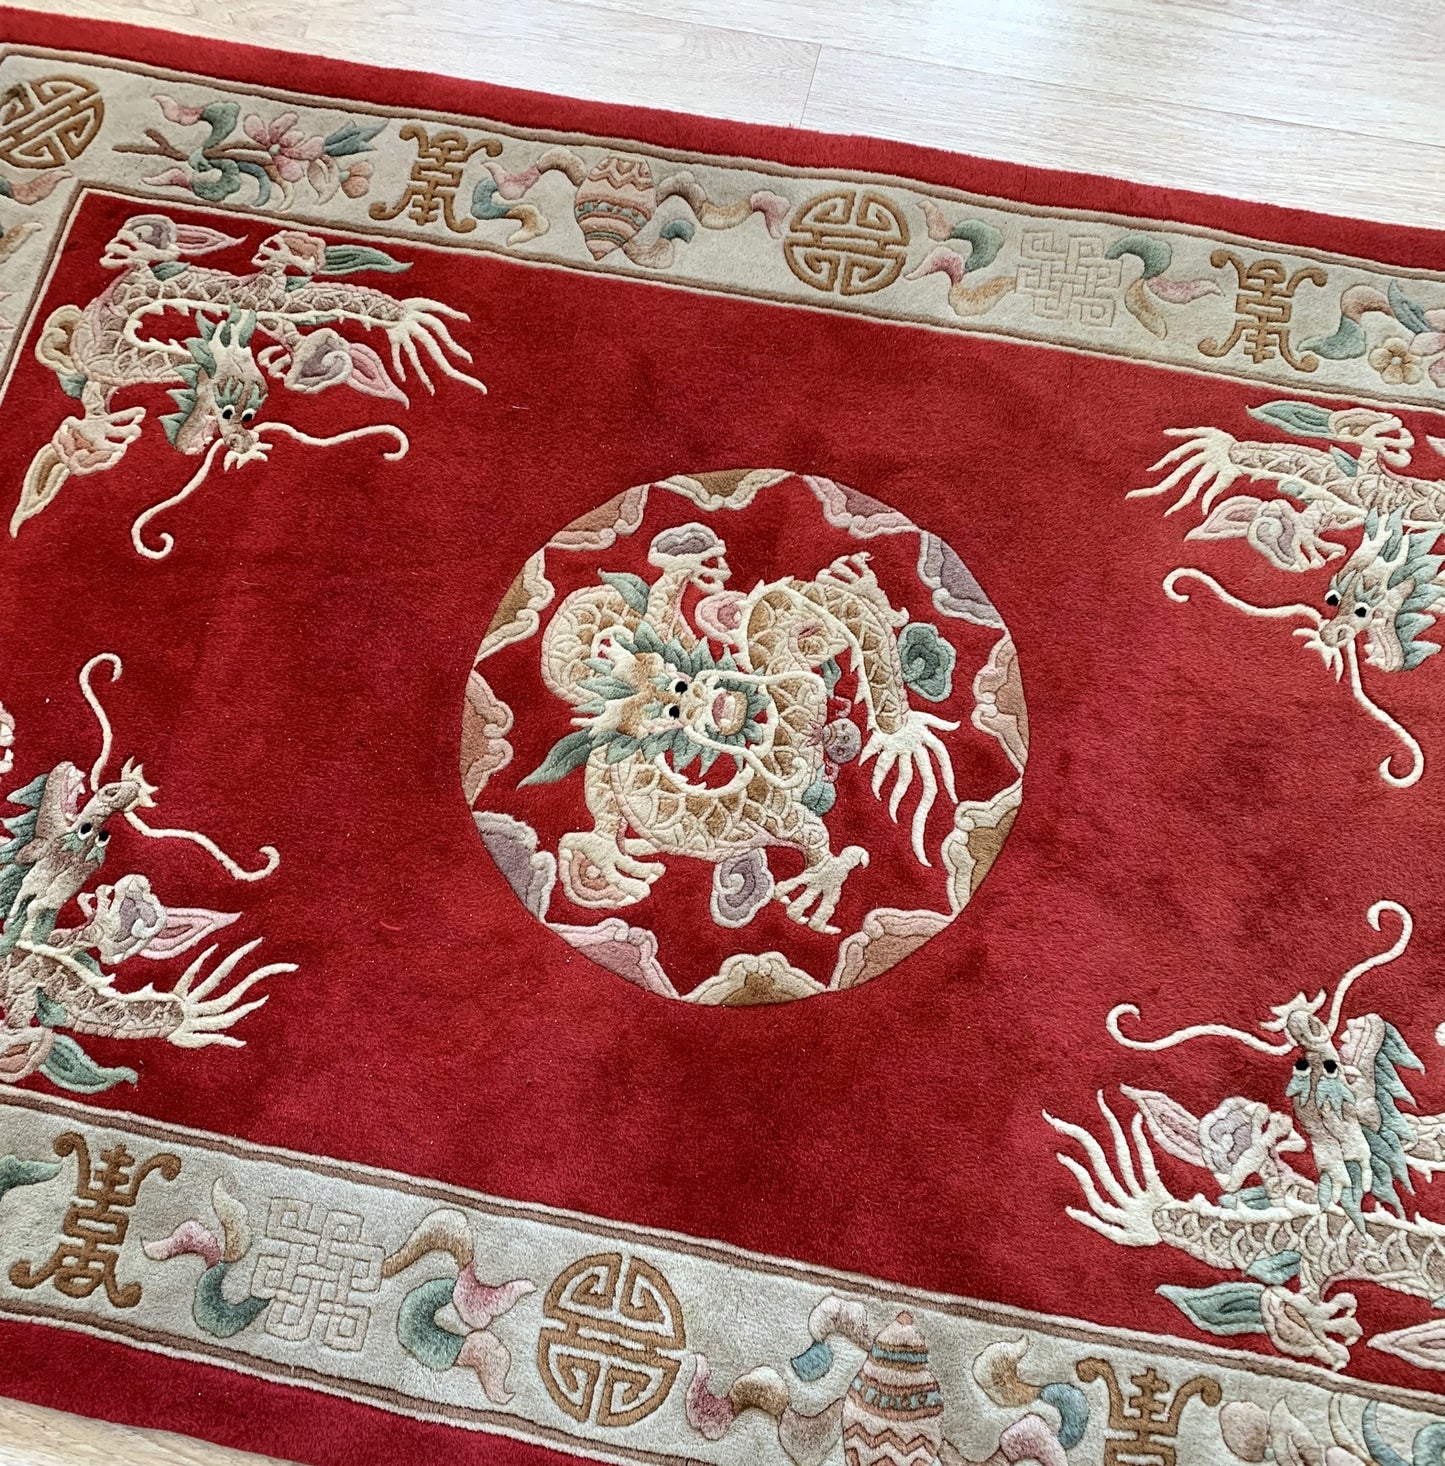 Handmade vintage Art Deco Chinese rug in bright red color and dragon design. The rug is from the middle of 20th century in original good condition. 